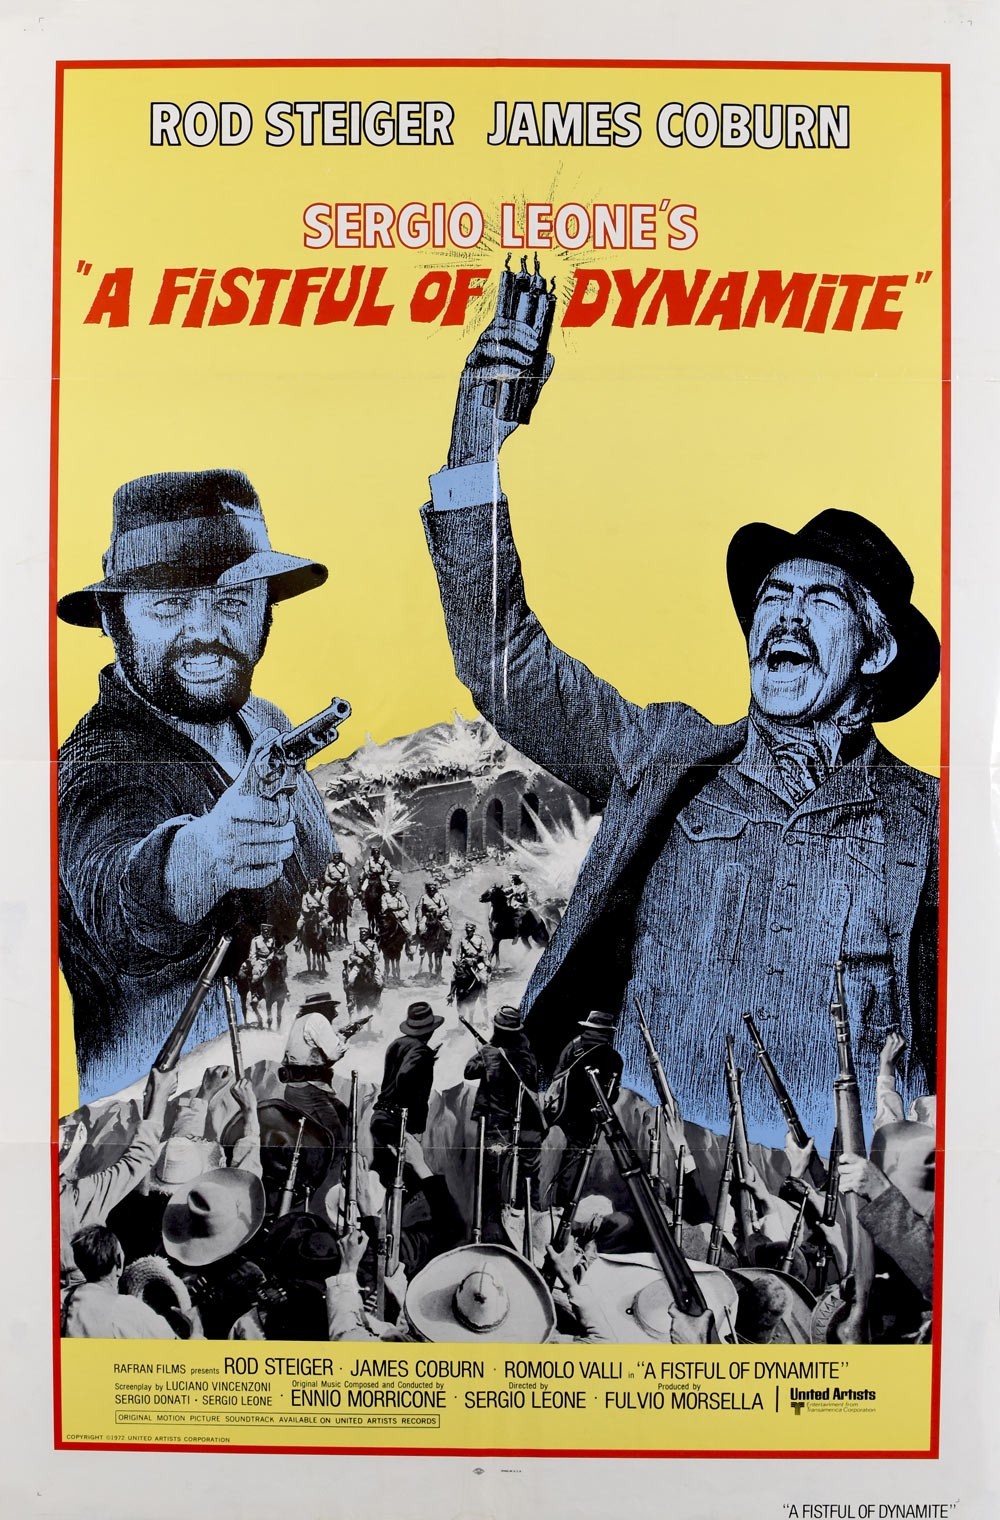 A fistful of dynamite James Coburn movie poster #3 